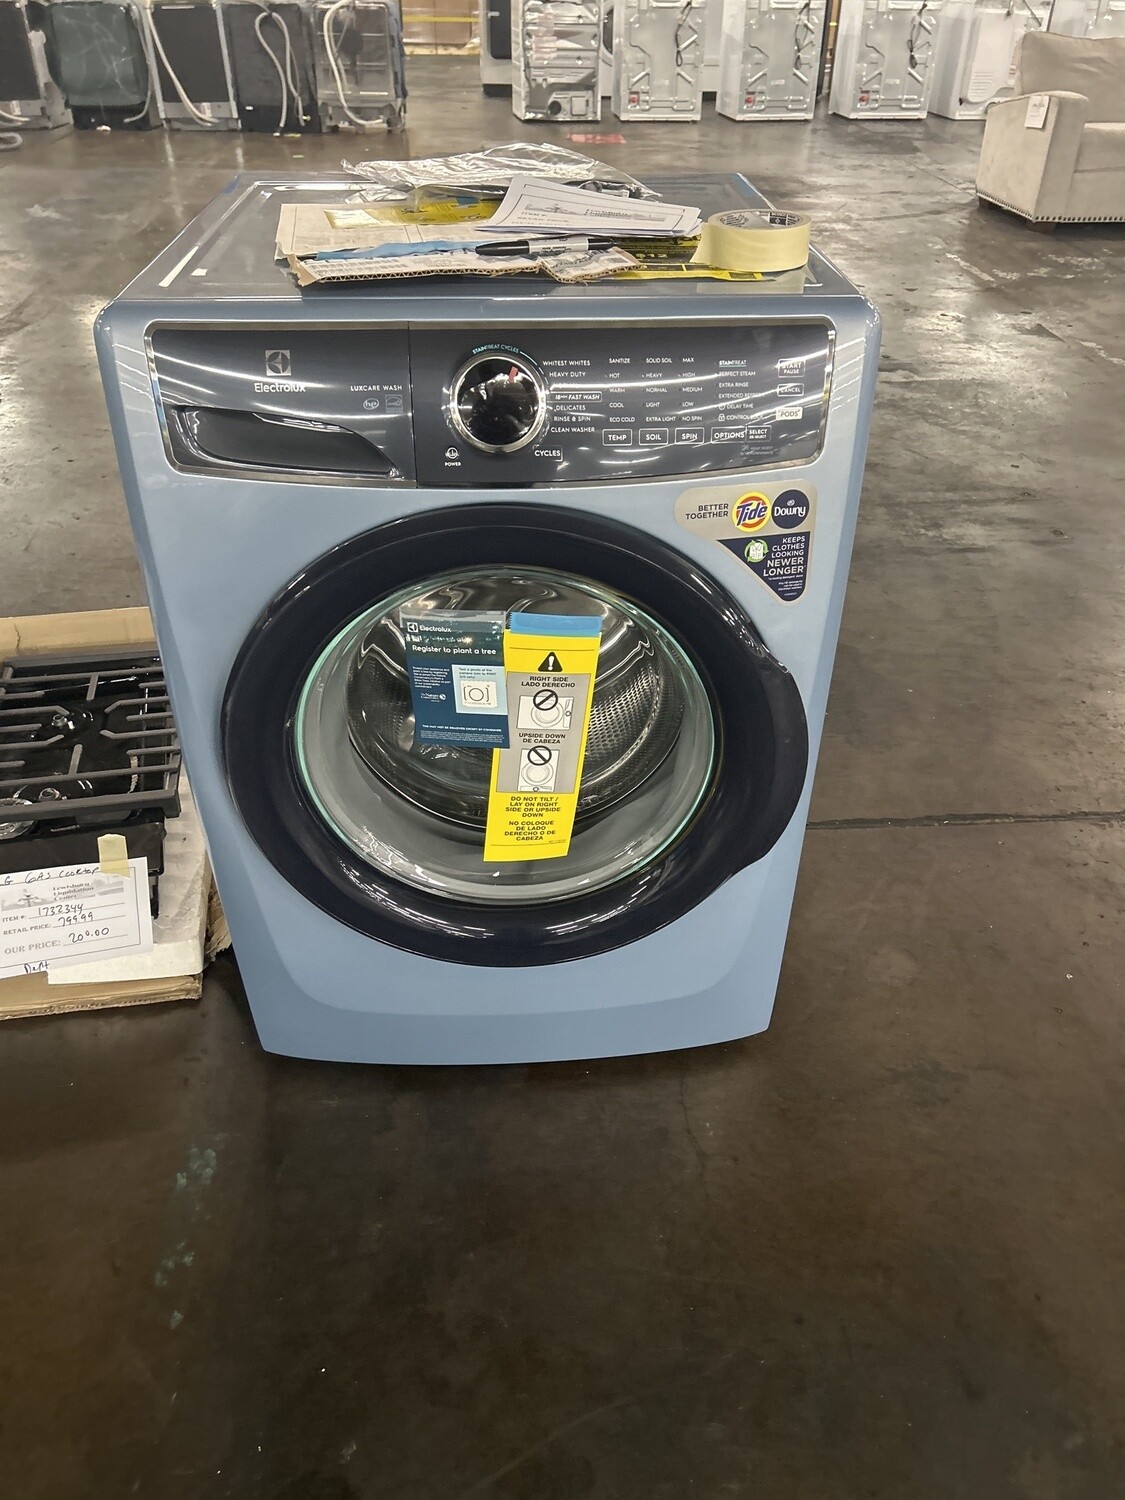 Electrolux 4.5-cu ft High Efficiency Stackable Steam Cycle Front-Load Washer (Glacier Blue) ENERGY STAR, Retail Price: 798